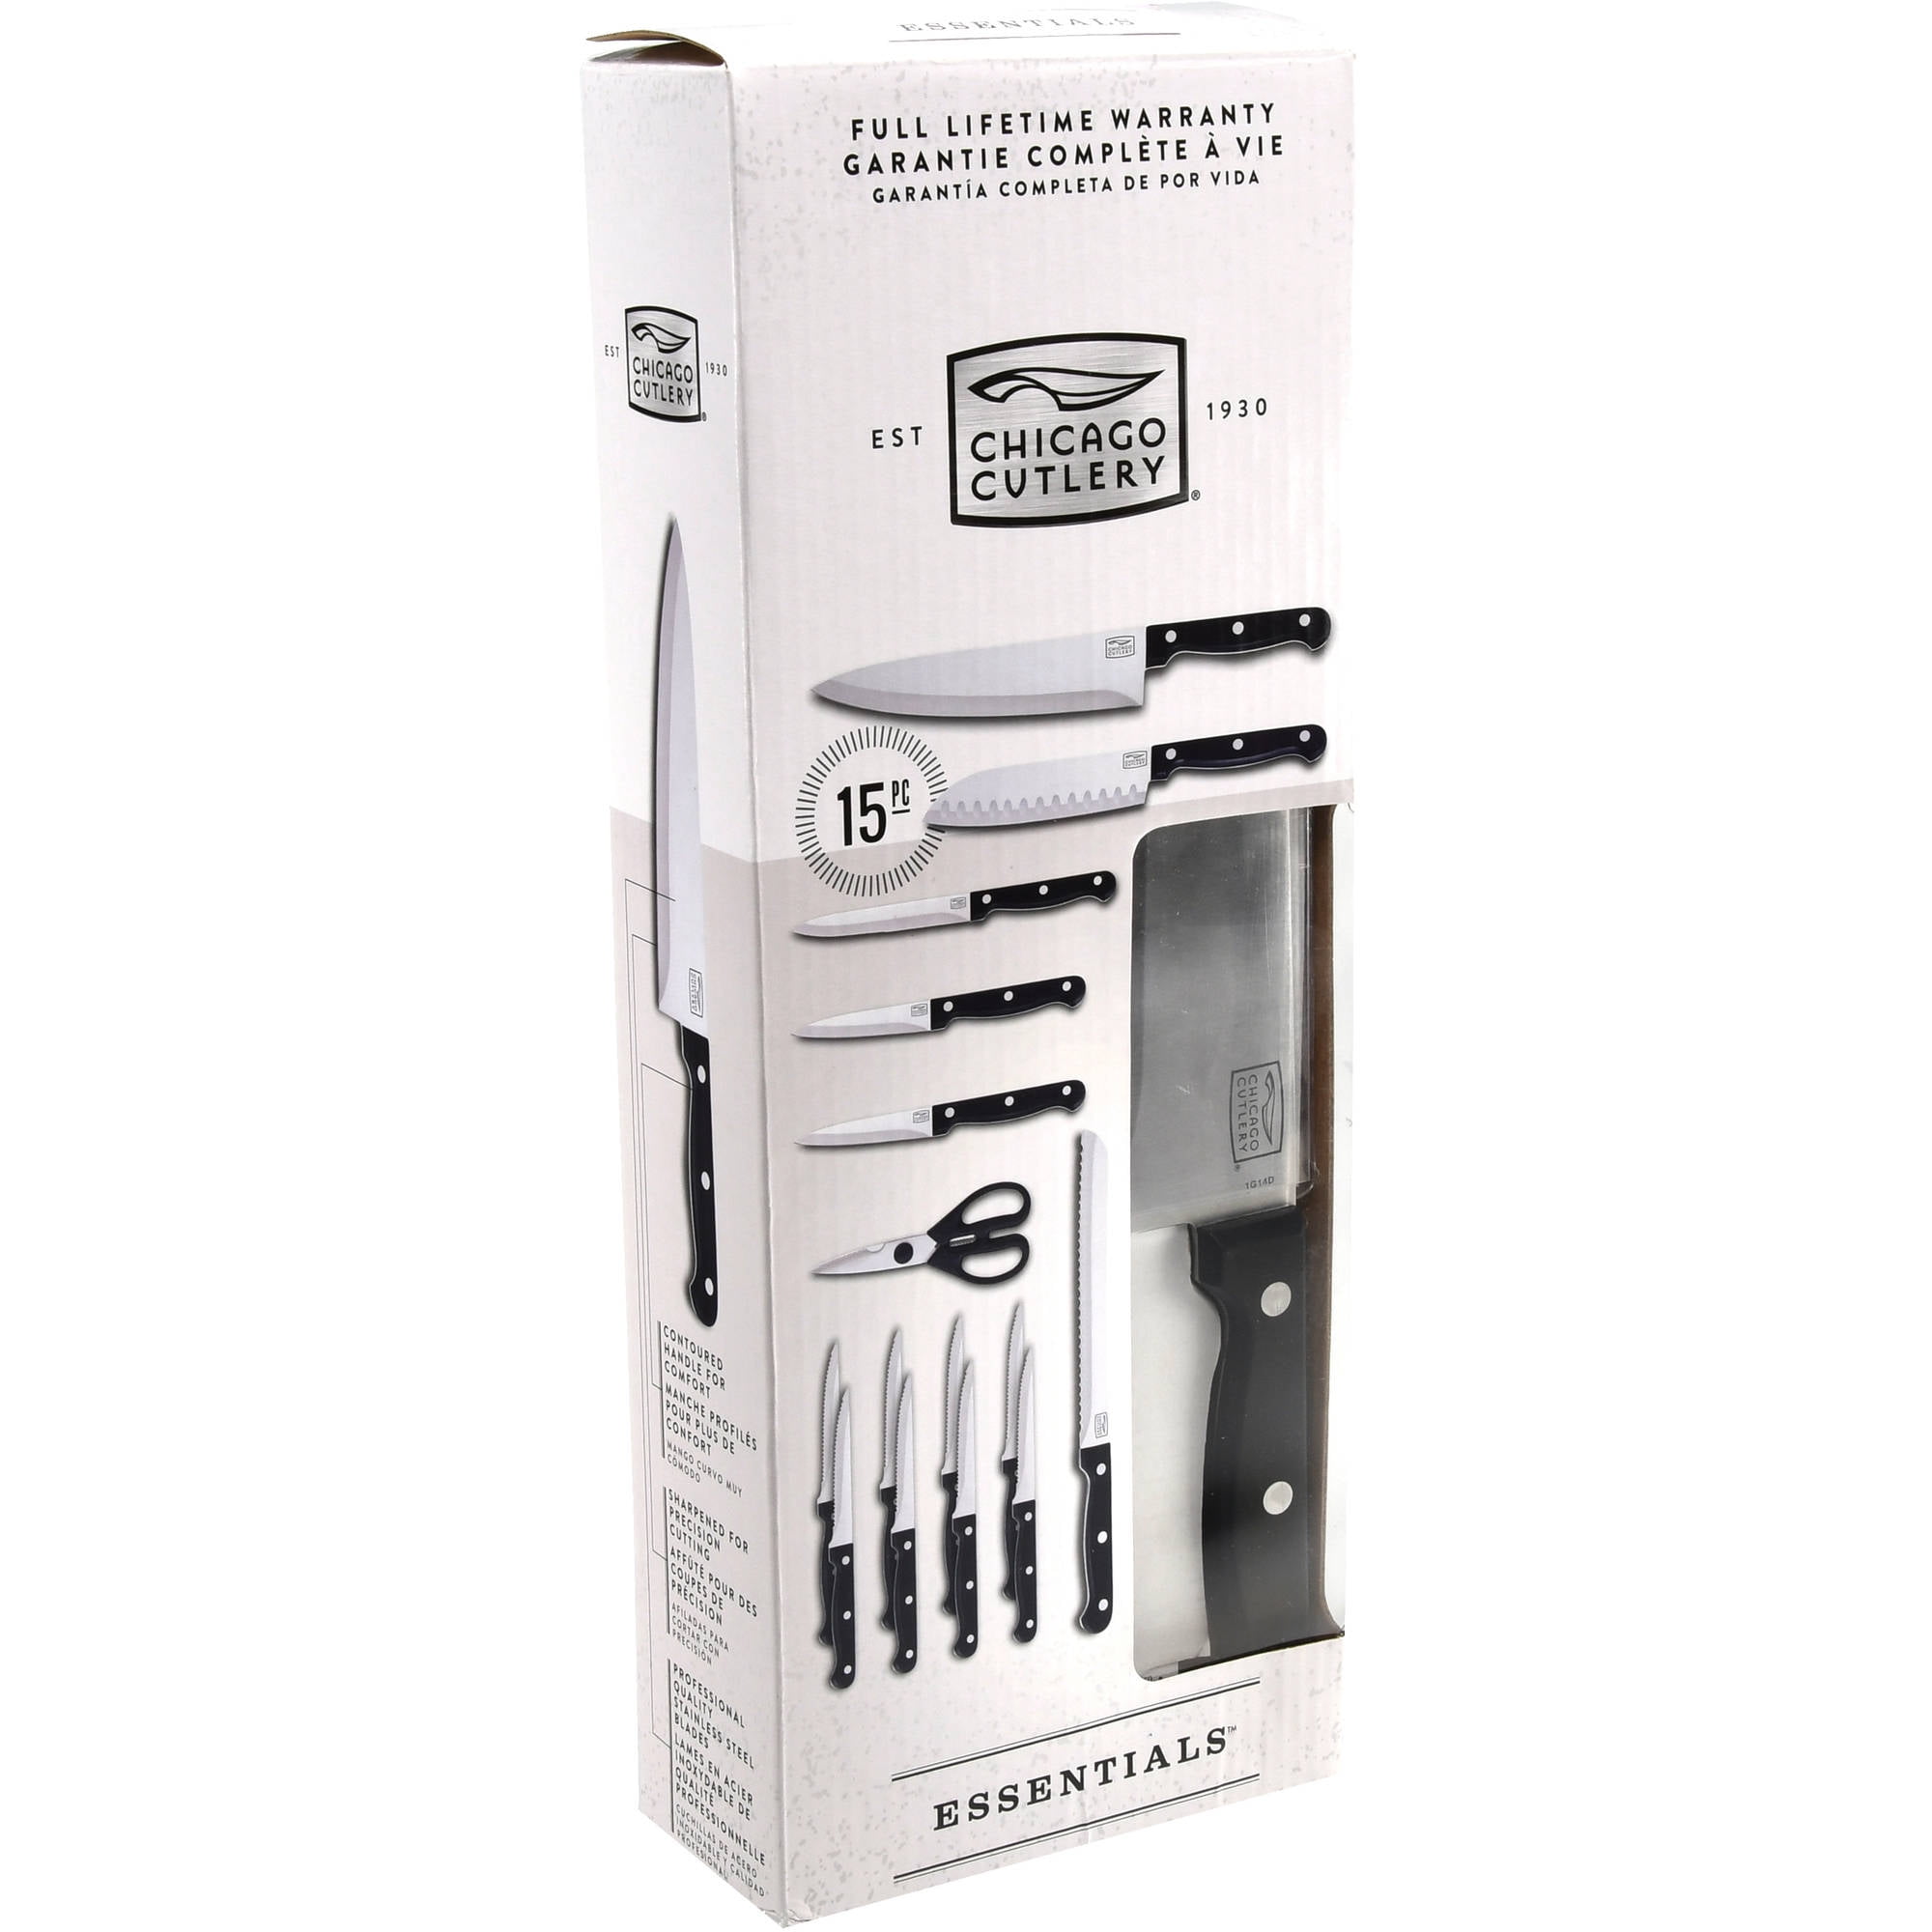 Chicago Cutlery Essentials 3.5 In. Paring Knife 1092189 Pack of 2, 2 -  Gerbes Super Markets